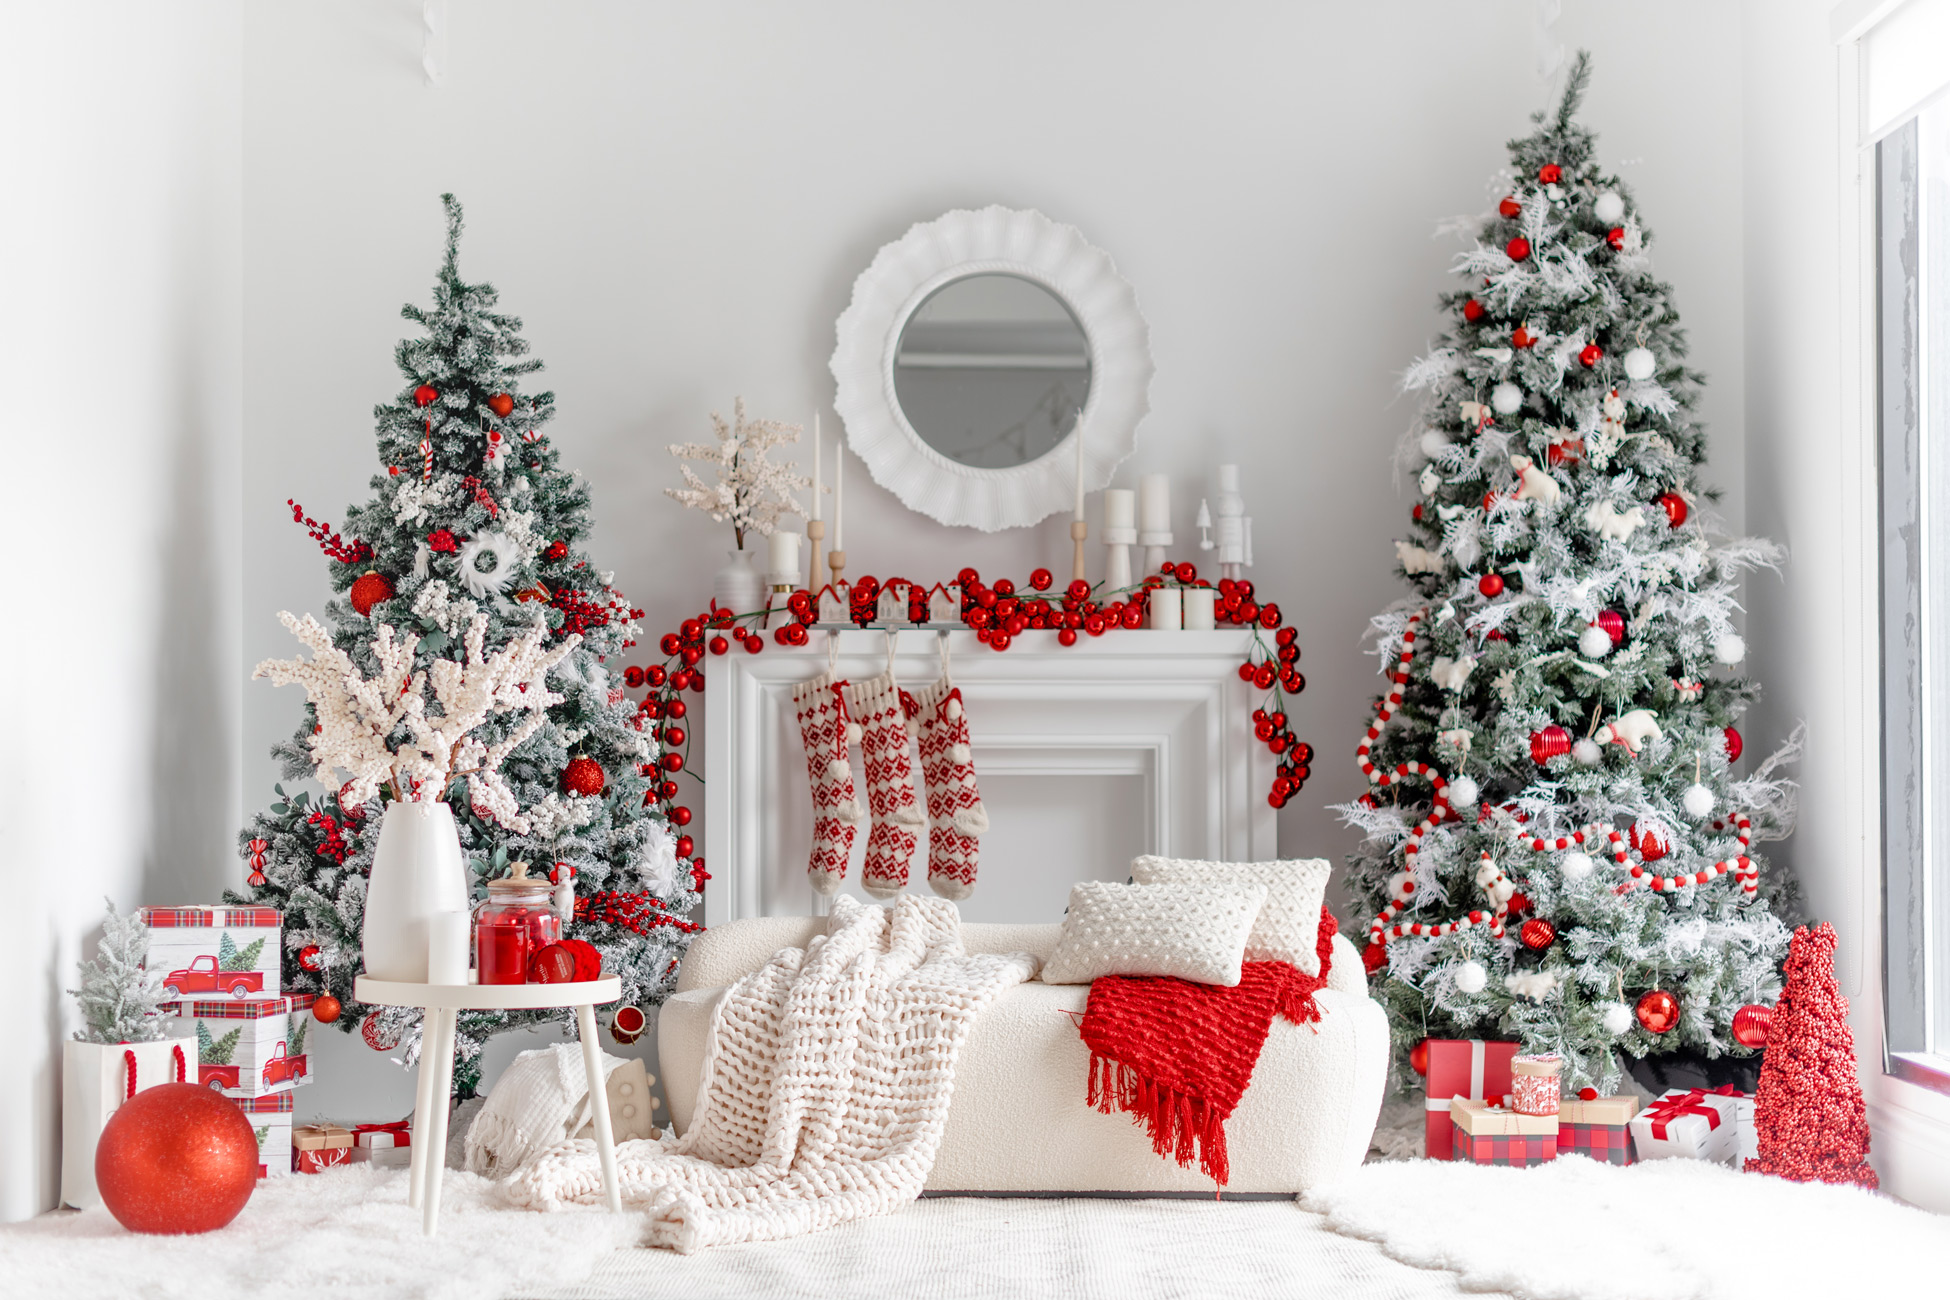 5 Beautiful Dried Fruit Christmas Decorations | Garden Benches Blog